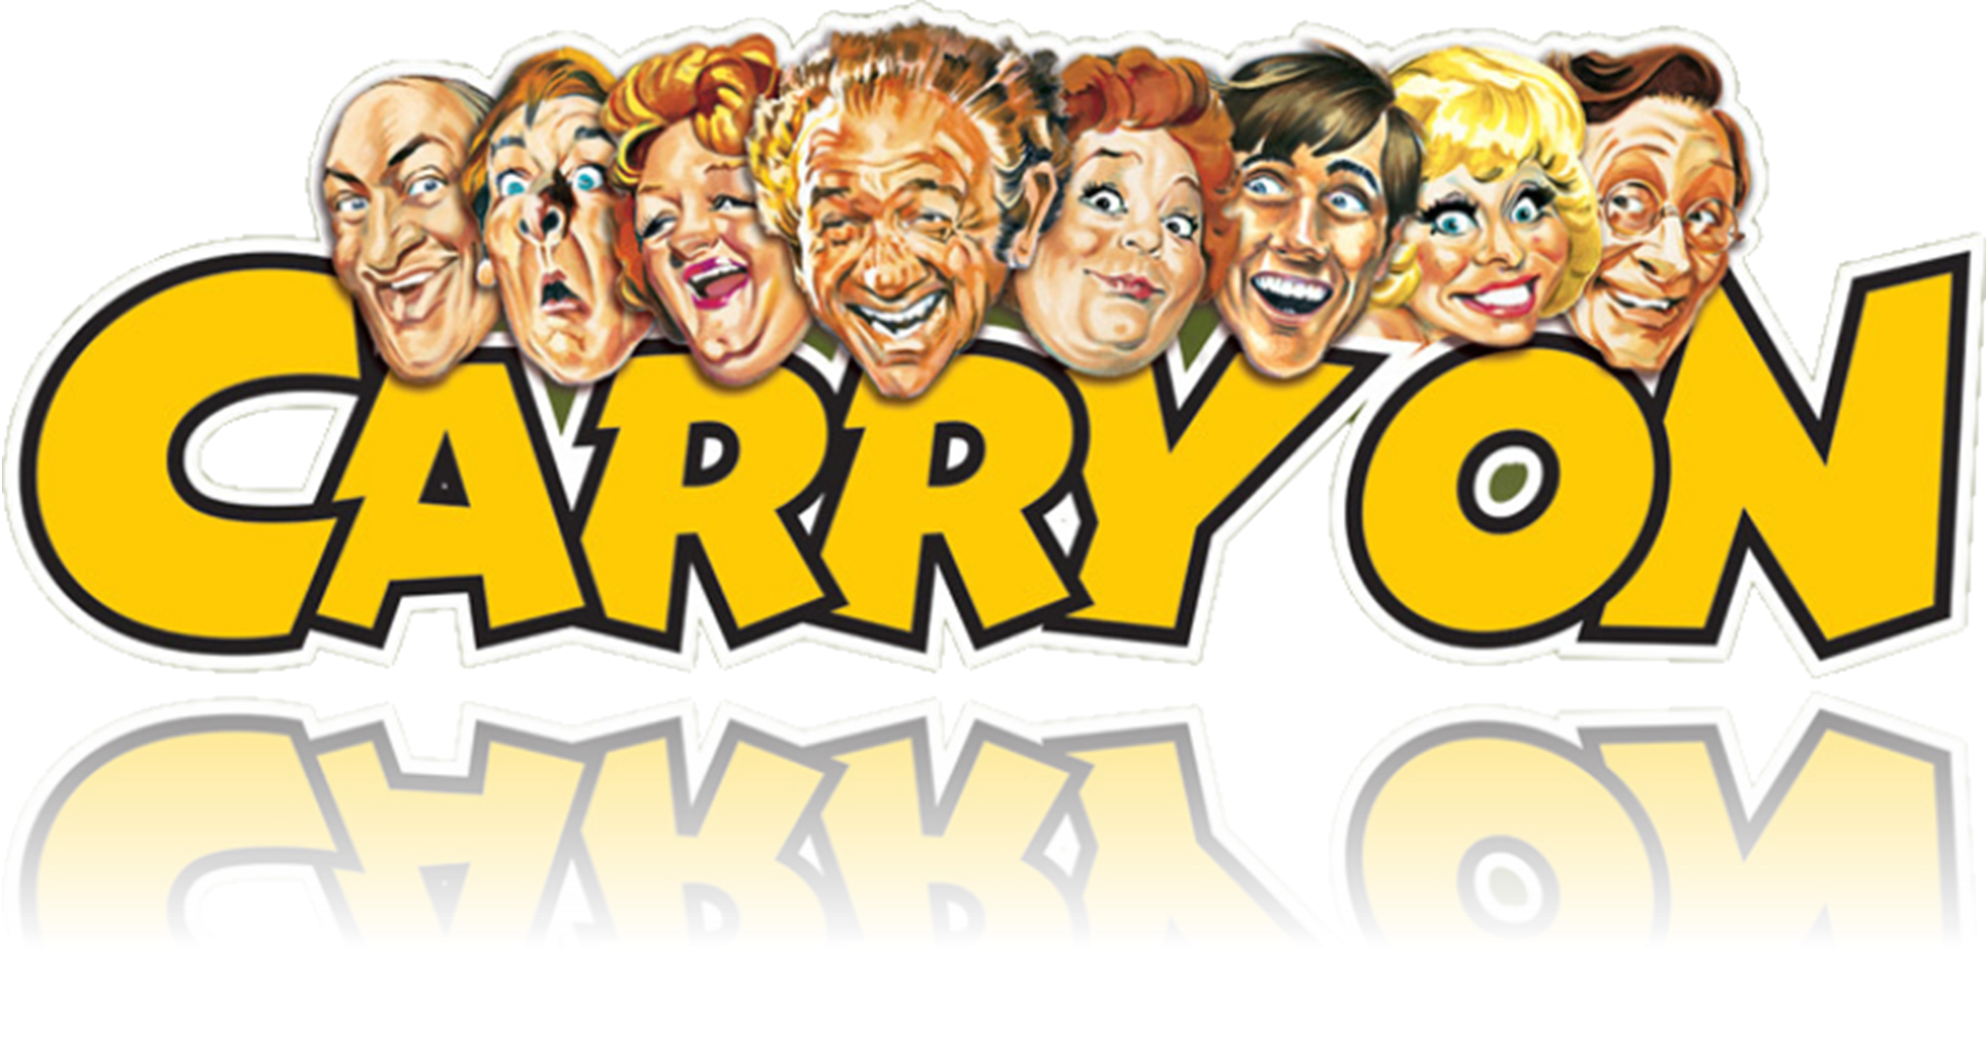 The British Carry On comedy films